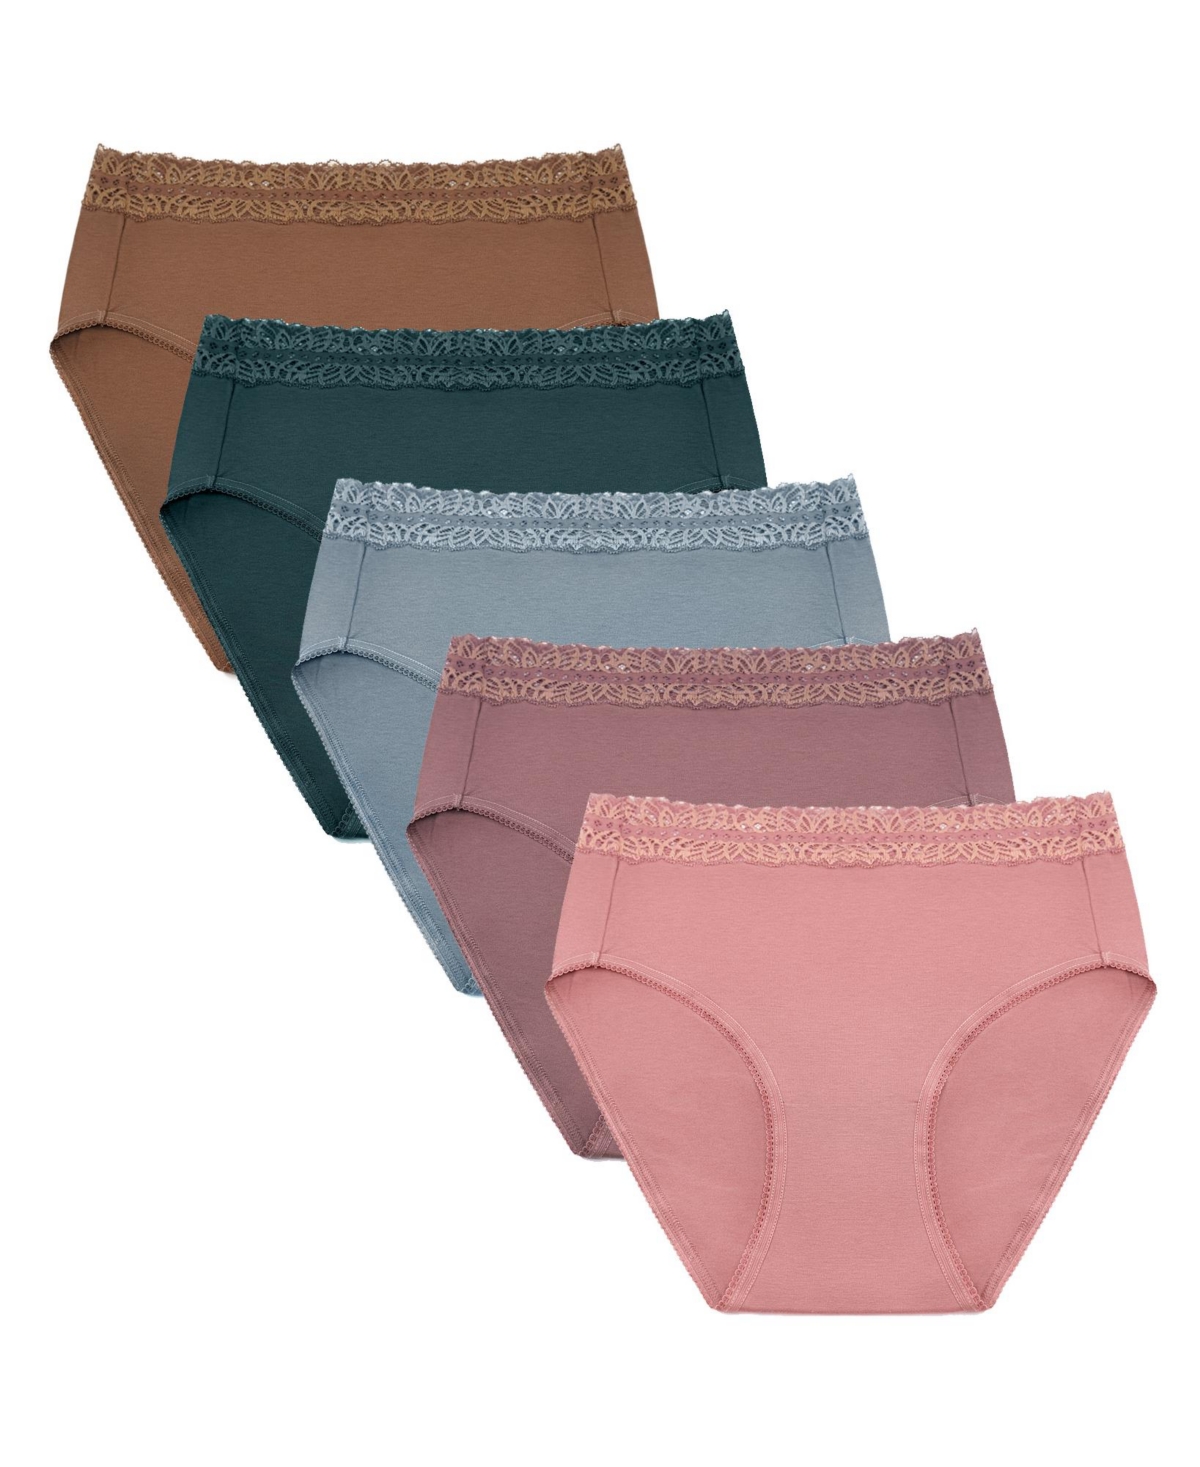 Maternity High-Waisted Postpartum Recovery Panties (5 Pack) - Dusty Hues